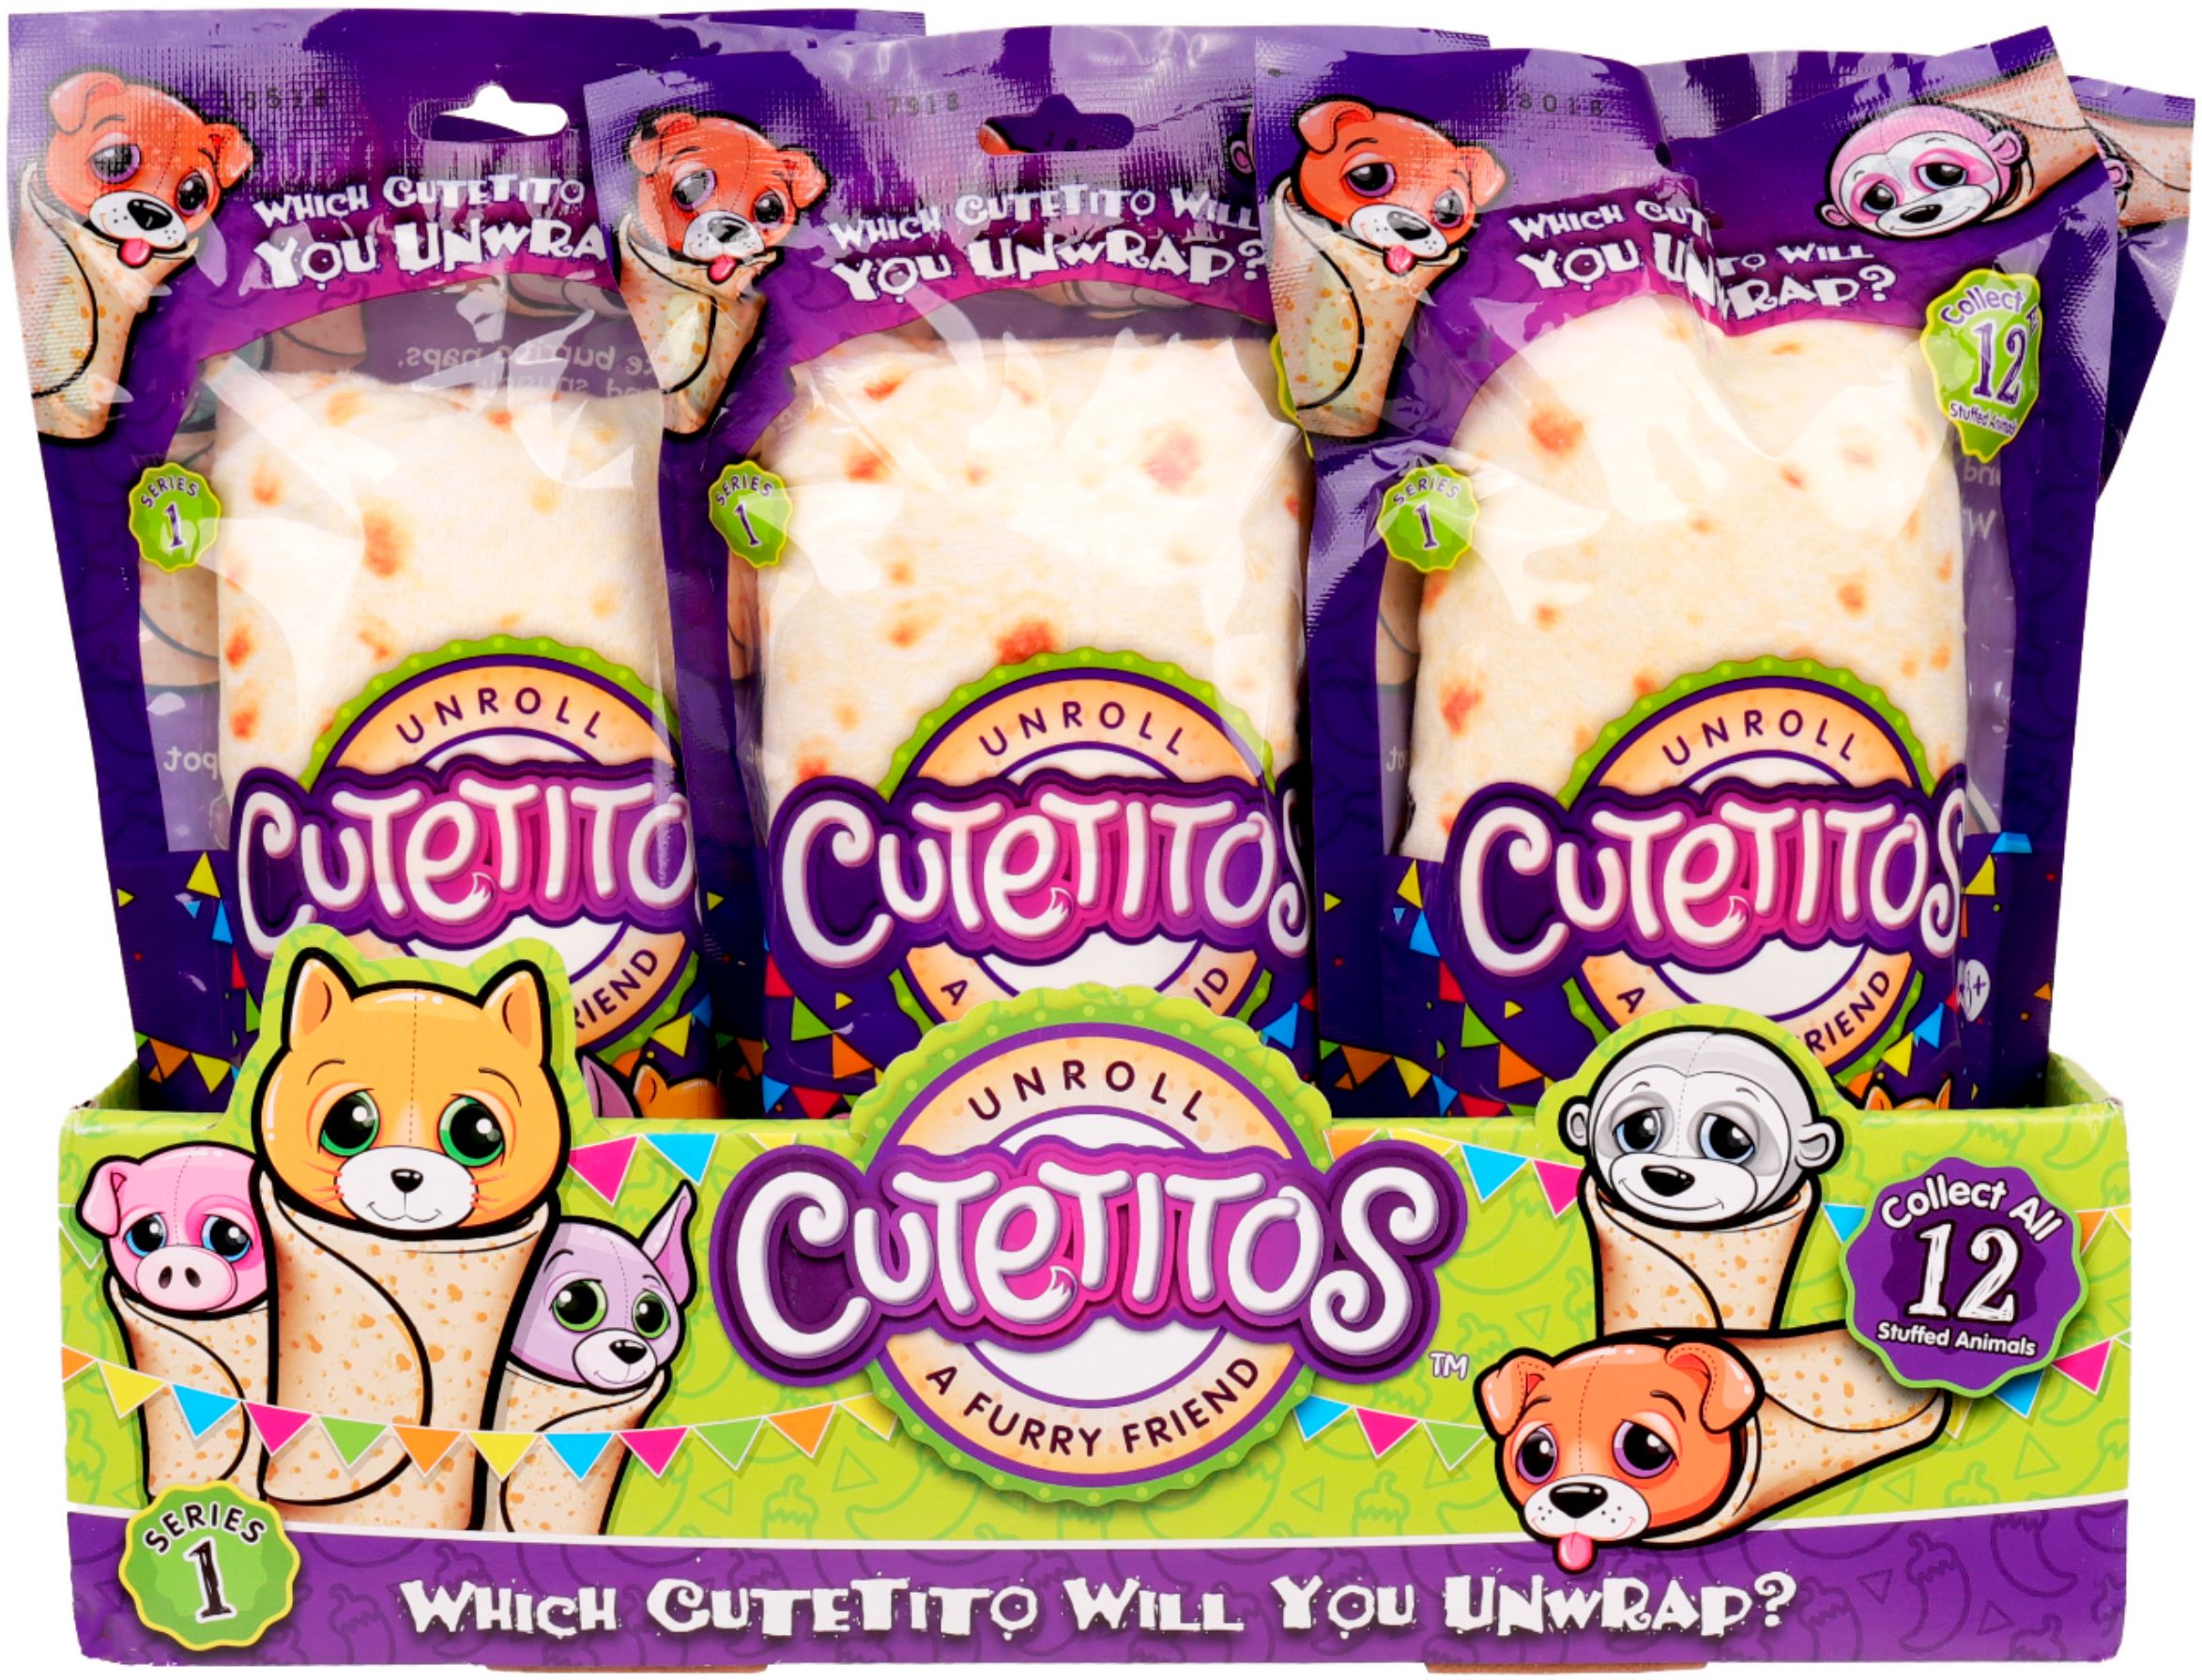 cutetitos collectible mystery stuffed animals